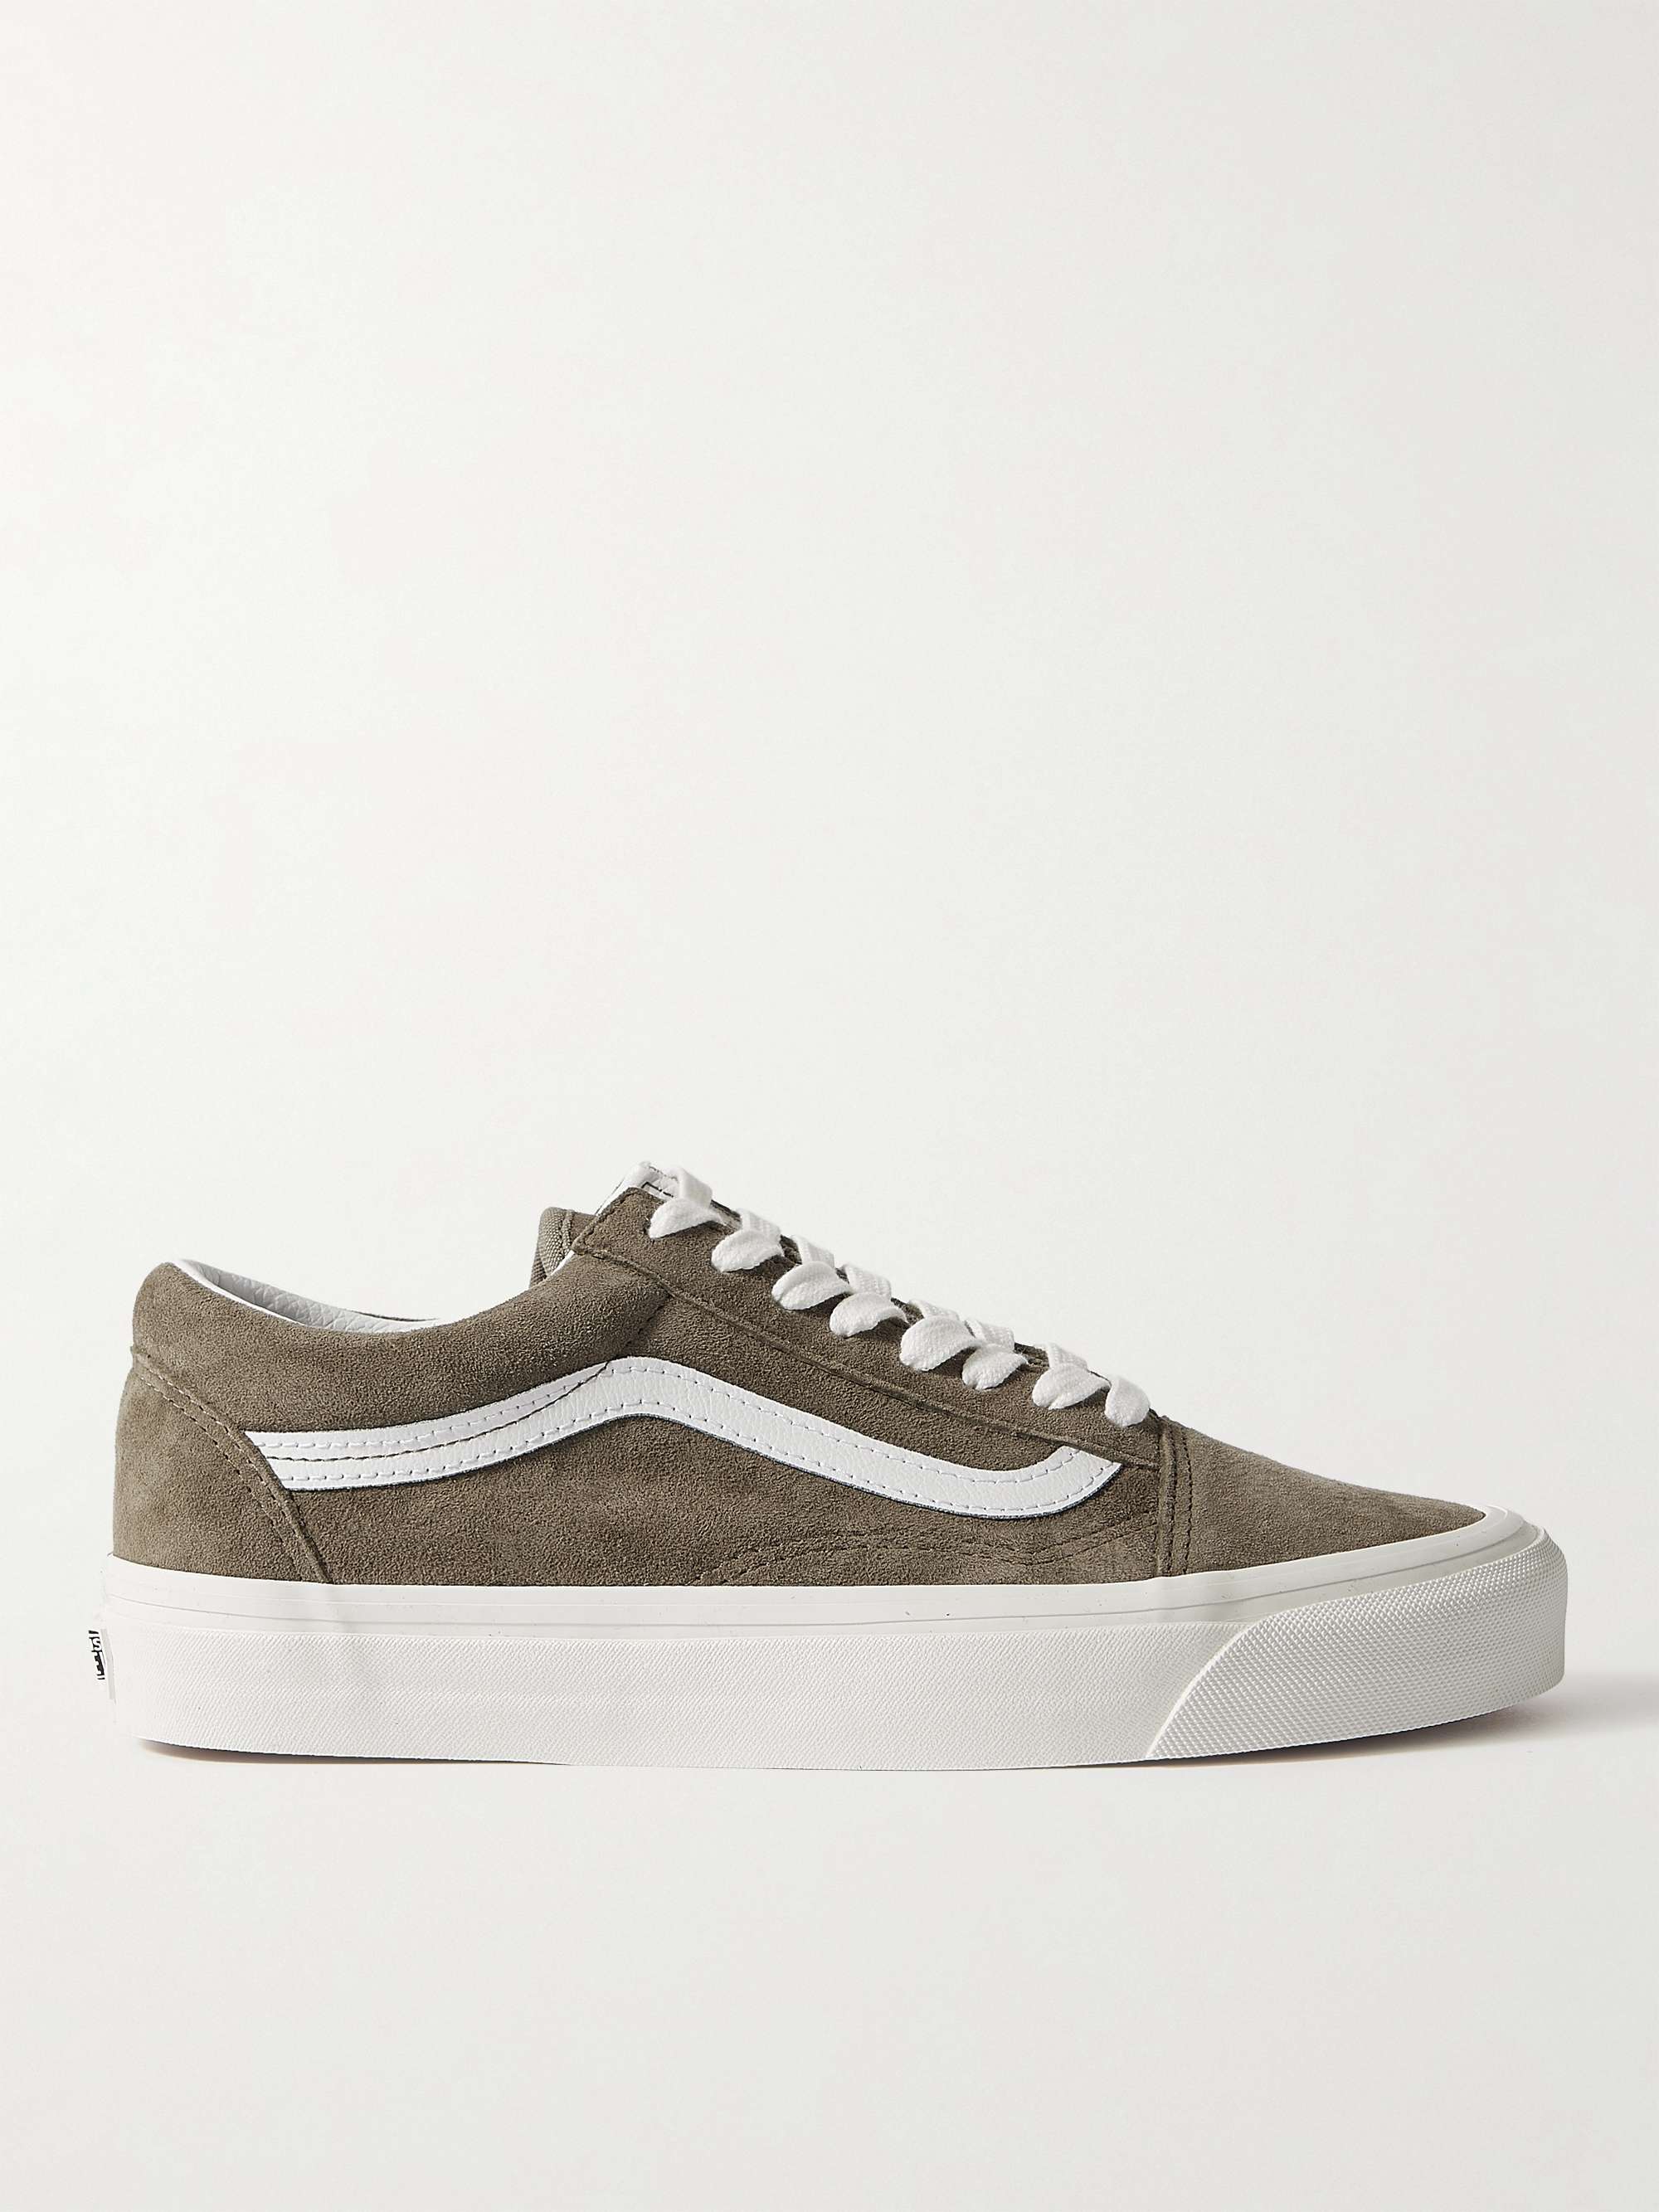 Anaheim Factory Old Skool 36 DX Leather-Trimmed Suede Sneakers